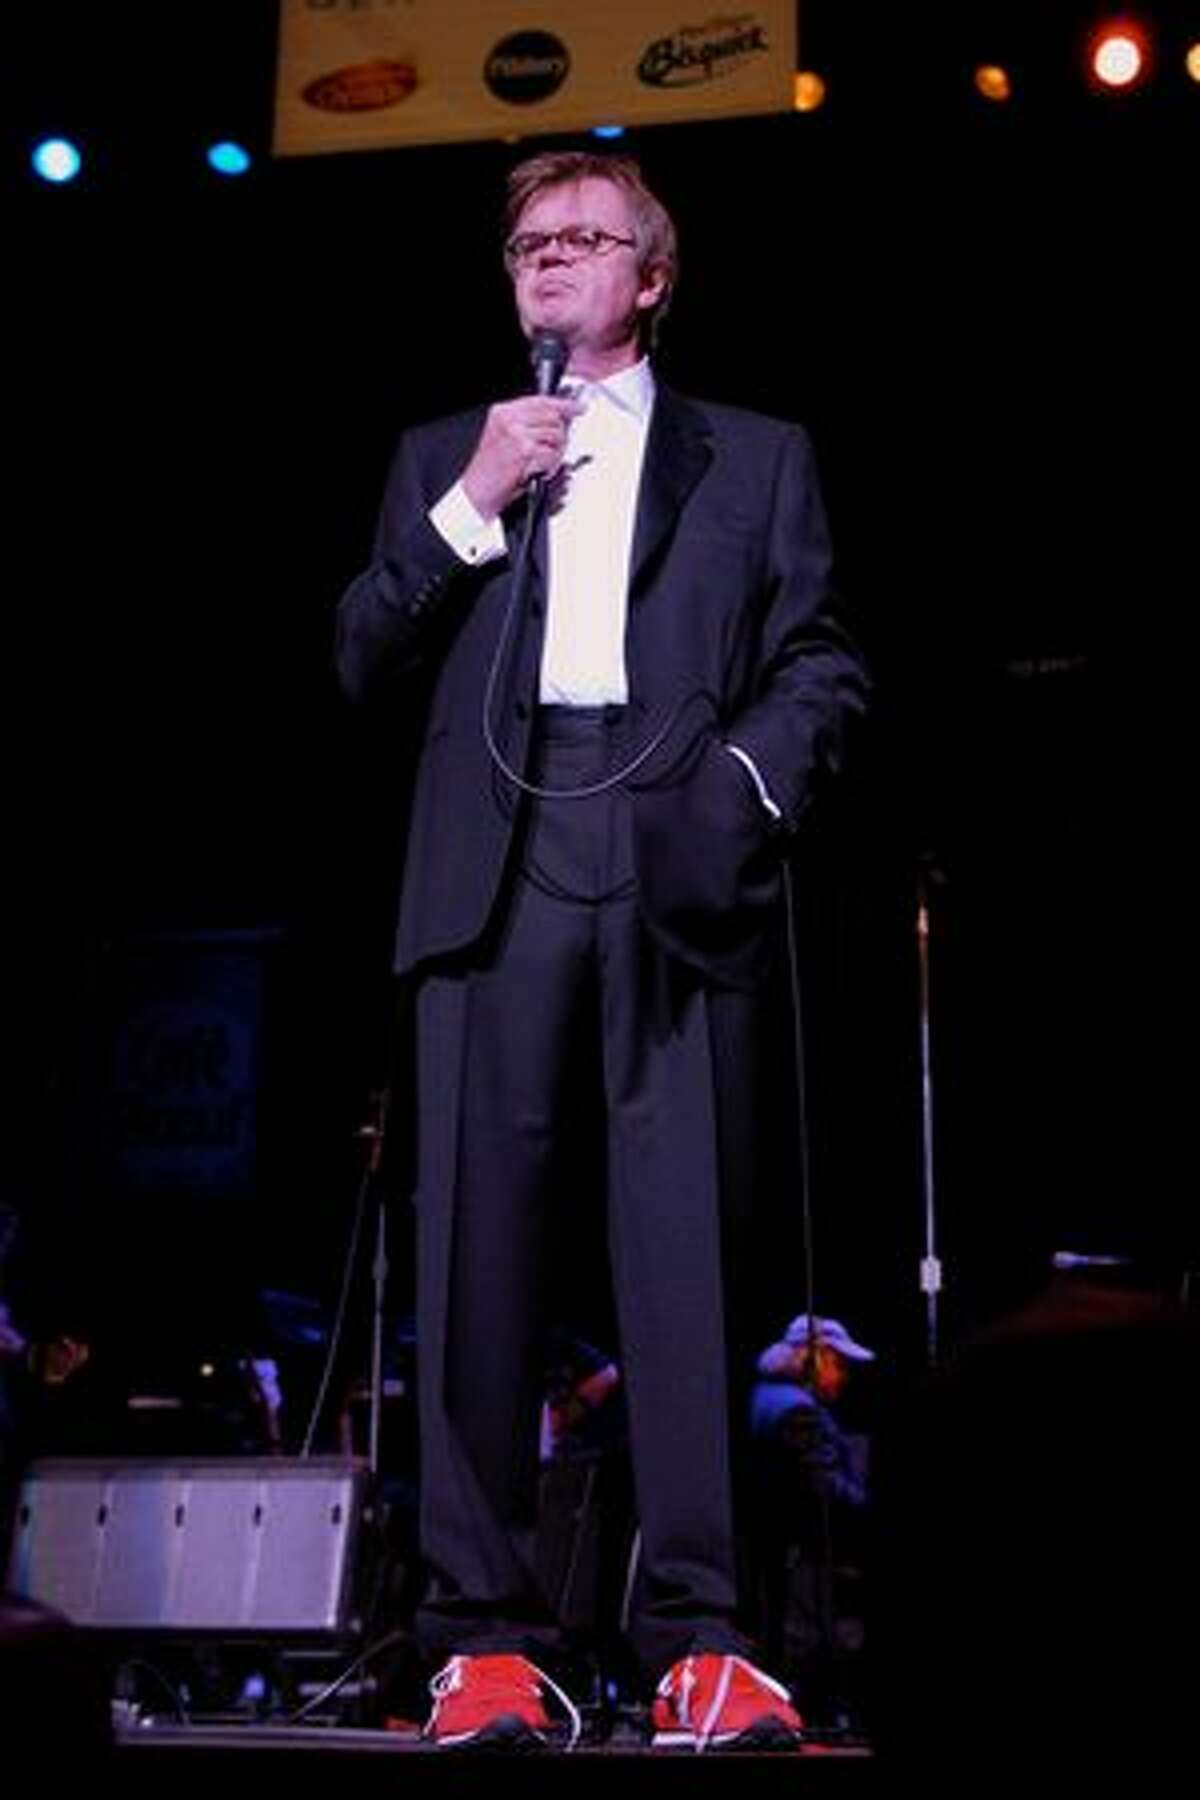 Garrison Keillor and crew perform a live broadcast of "A Prairie Home Companion" at The Paramount Theatre on March 27, 2010. His Easter performance on April 3 will also be performed at the venue.